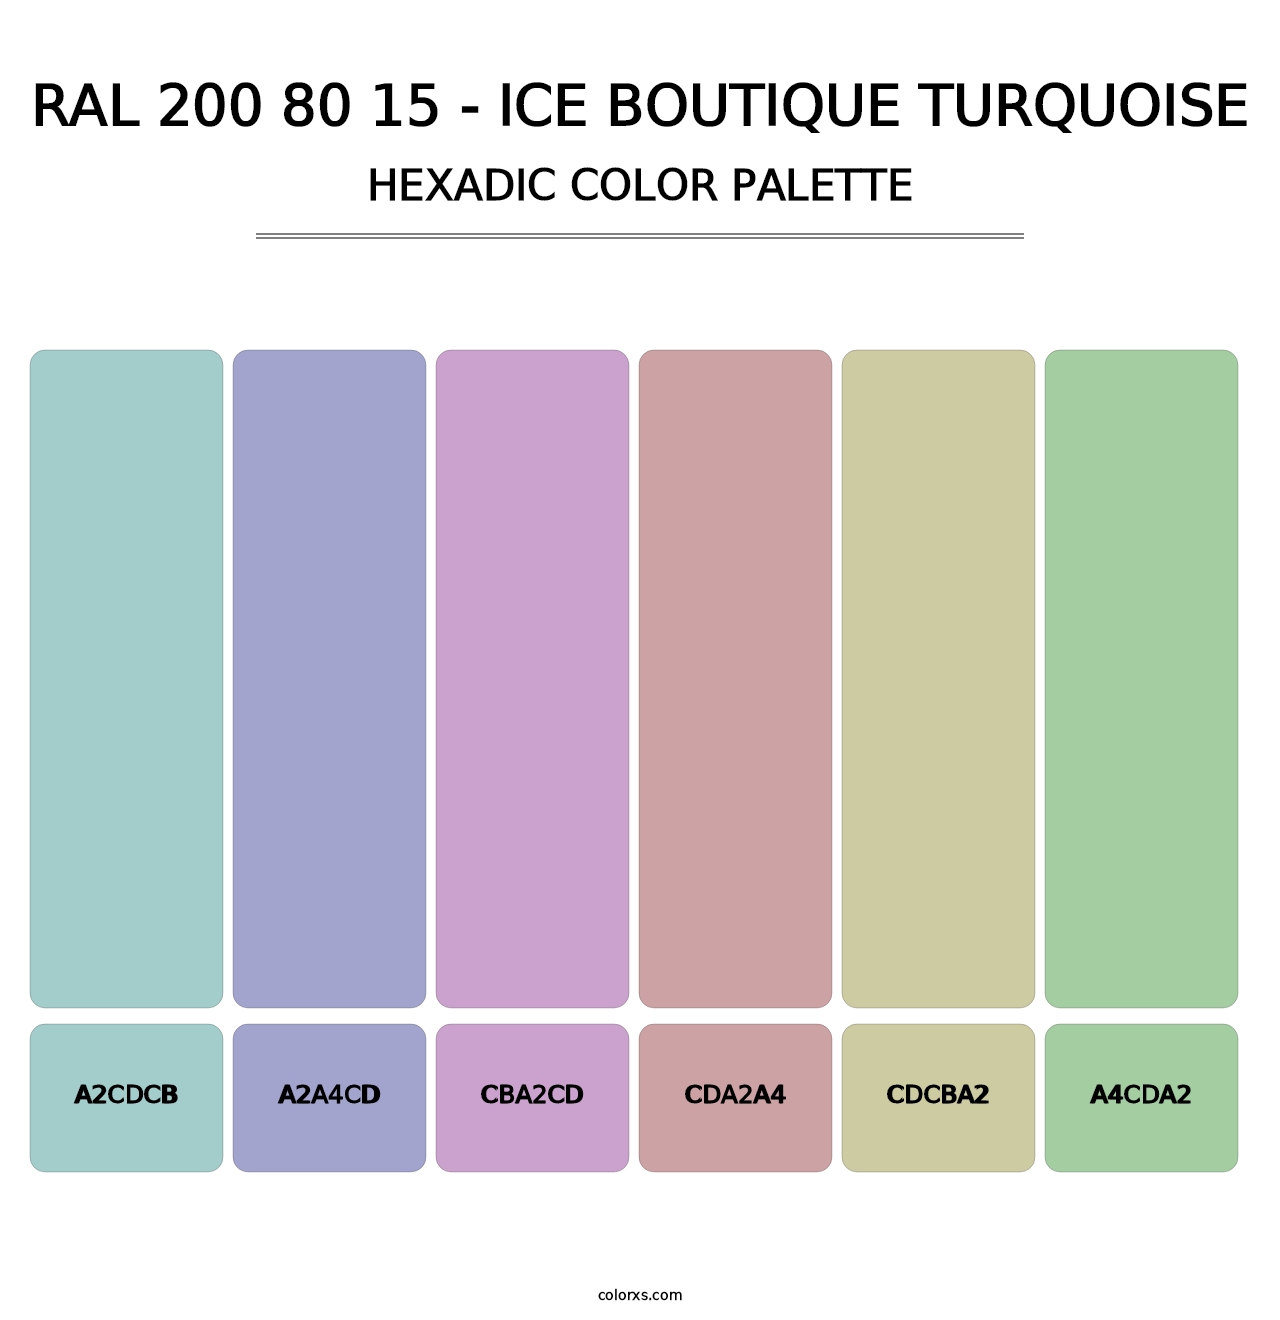 RAL 200 80 15 - Ice Boutique Turquoise - Hexadic Color Palette